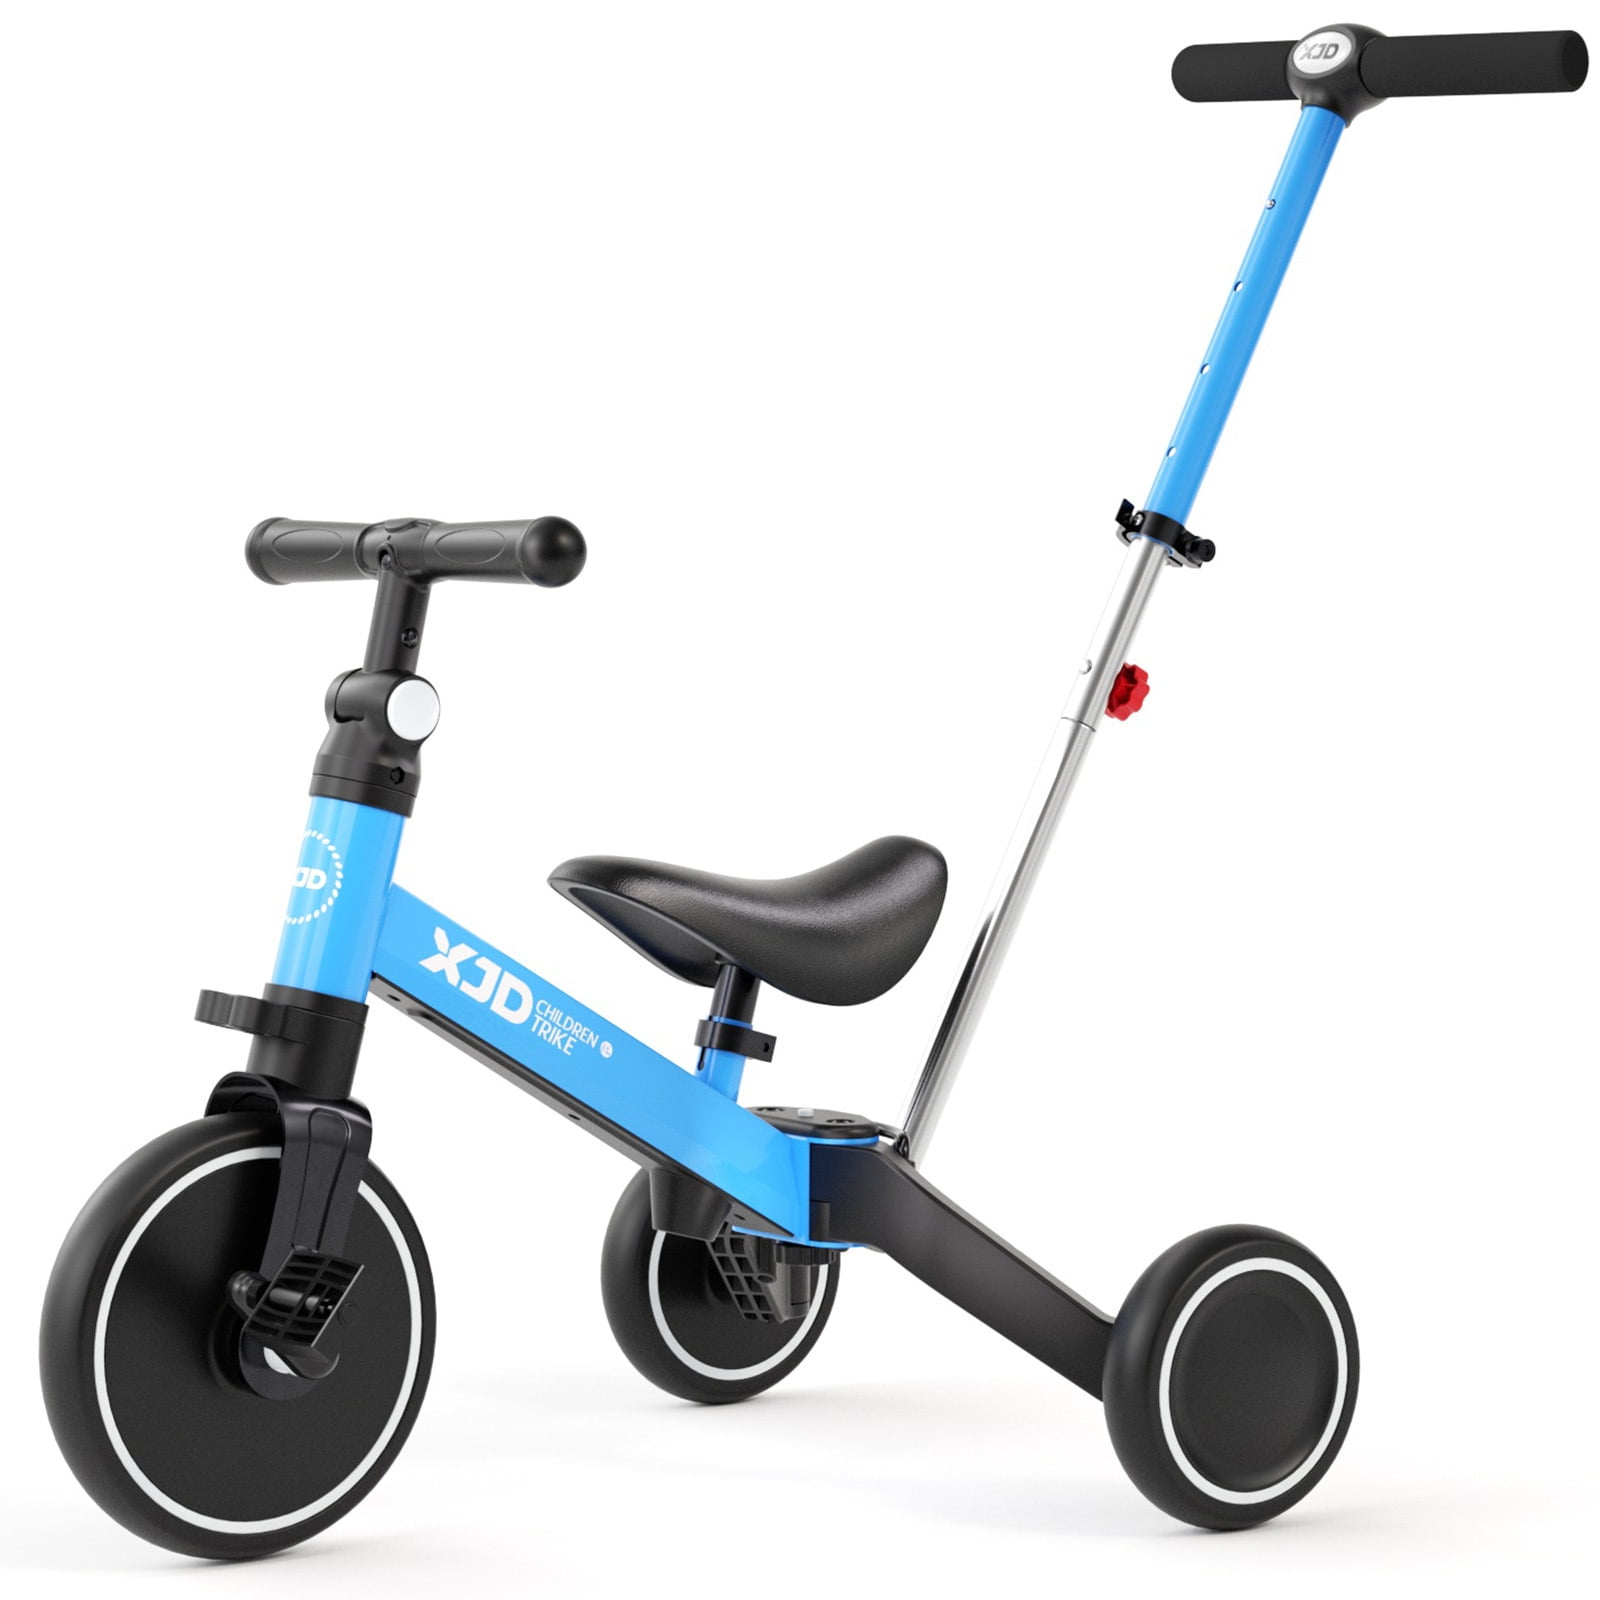 XJD 7 in 1 Toddler Bike with Push Handle,Tricycles for 1 to 3 Years Old ...